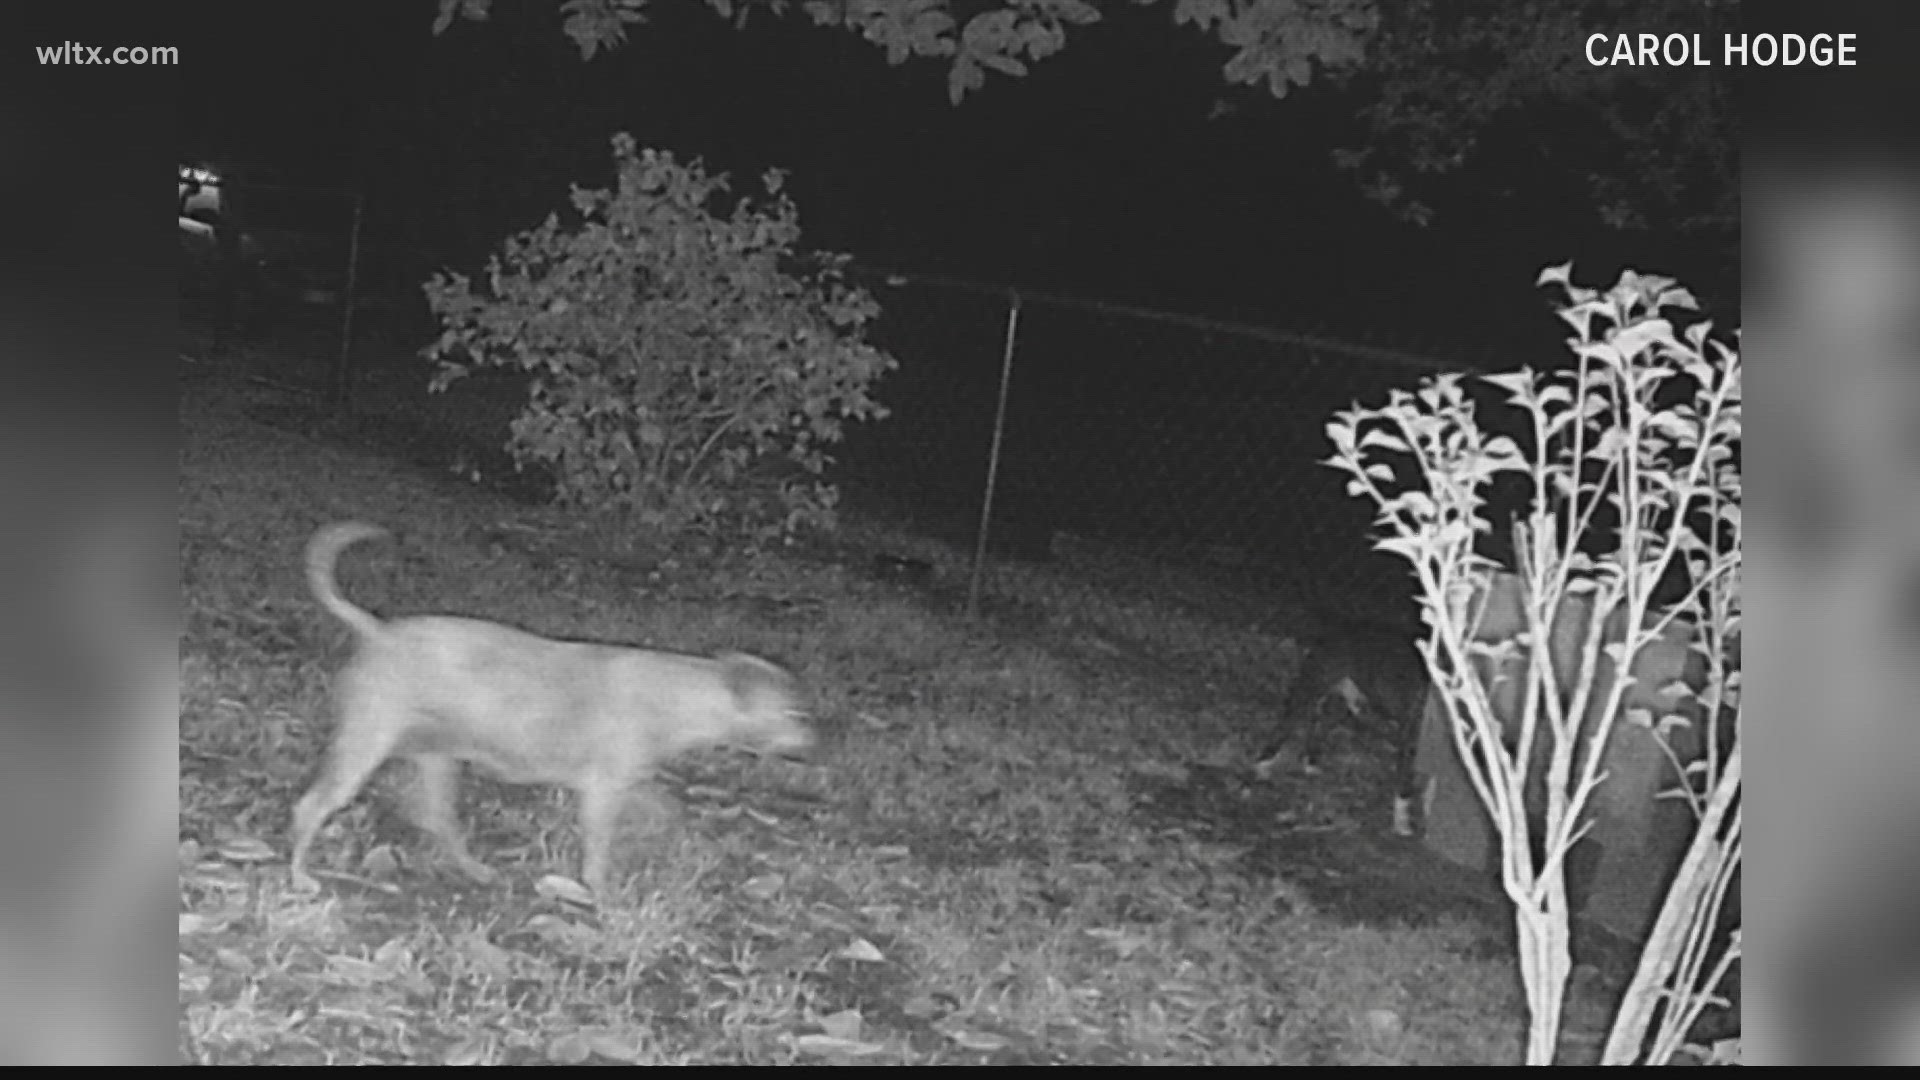 Why unleashed and loose animals have become a concern in Sumter.